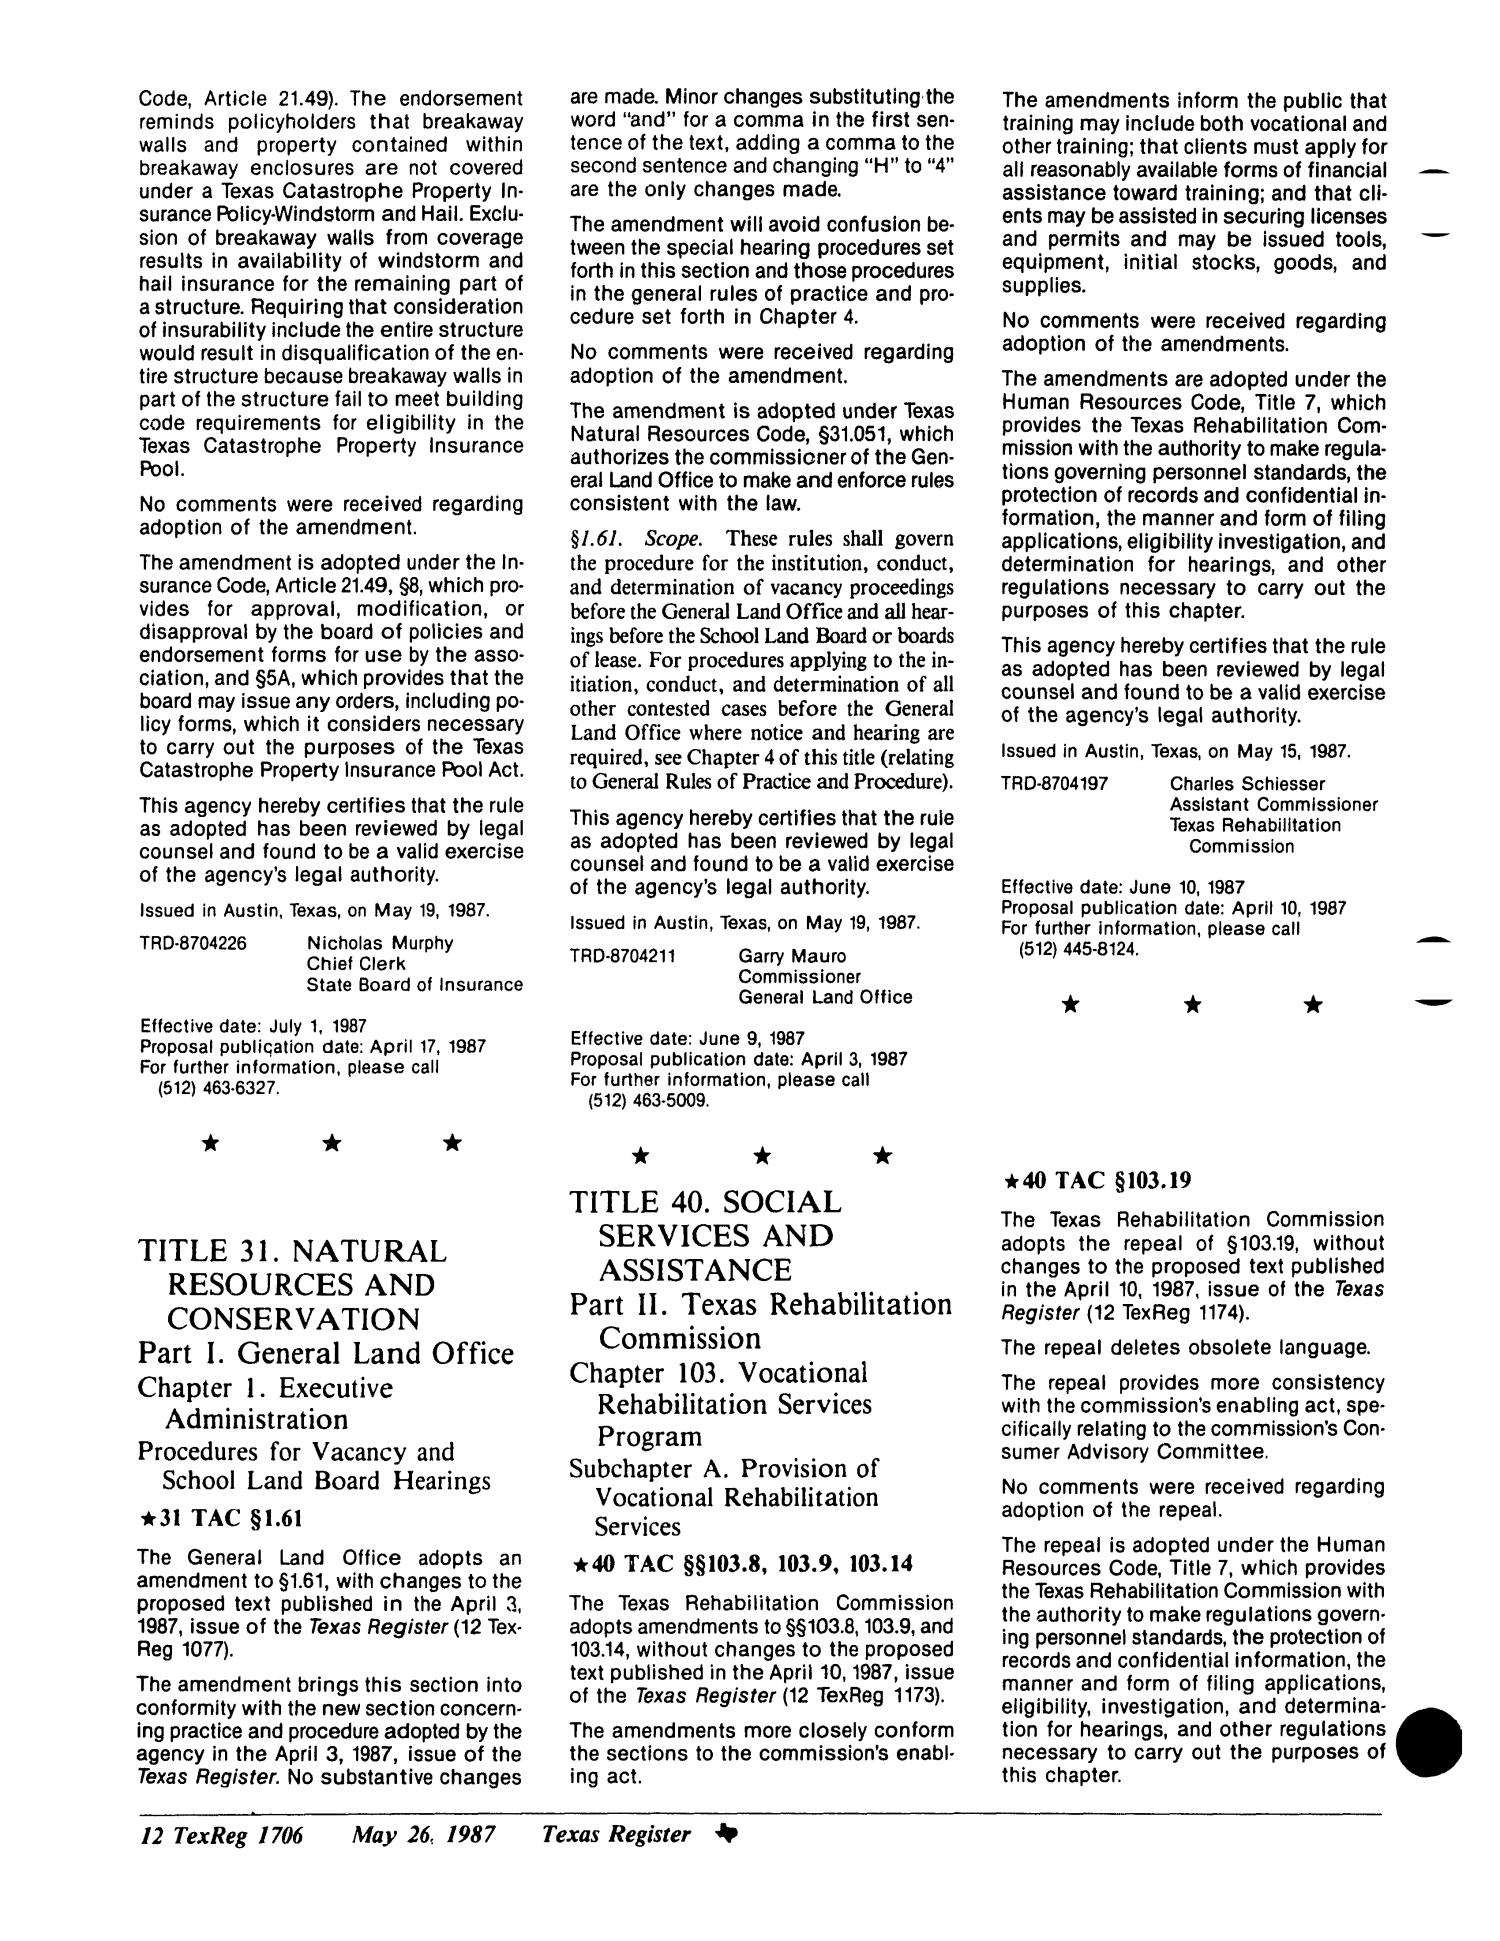 Texas Register, Volume 12, Number 39, Pages 1679-1717, May 26, 1987
                                                
                                                    1706
                                                